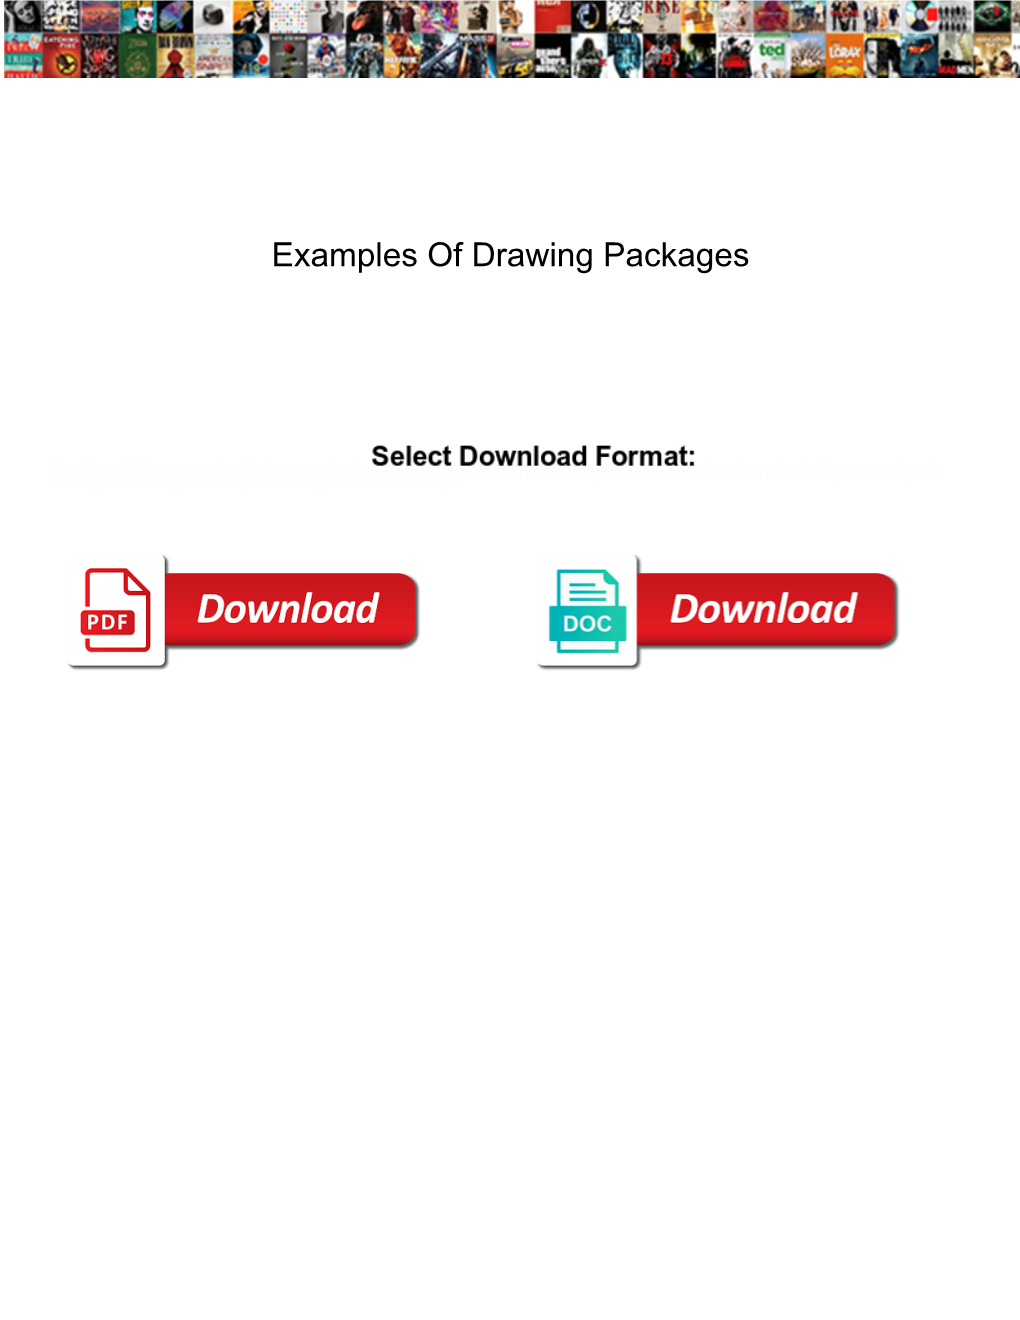 Examples of Drawing Packages